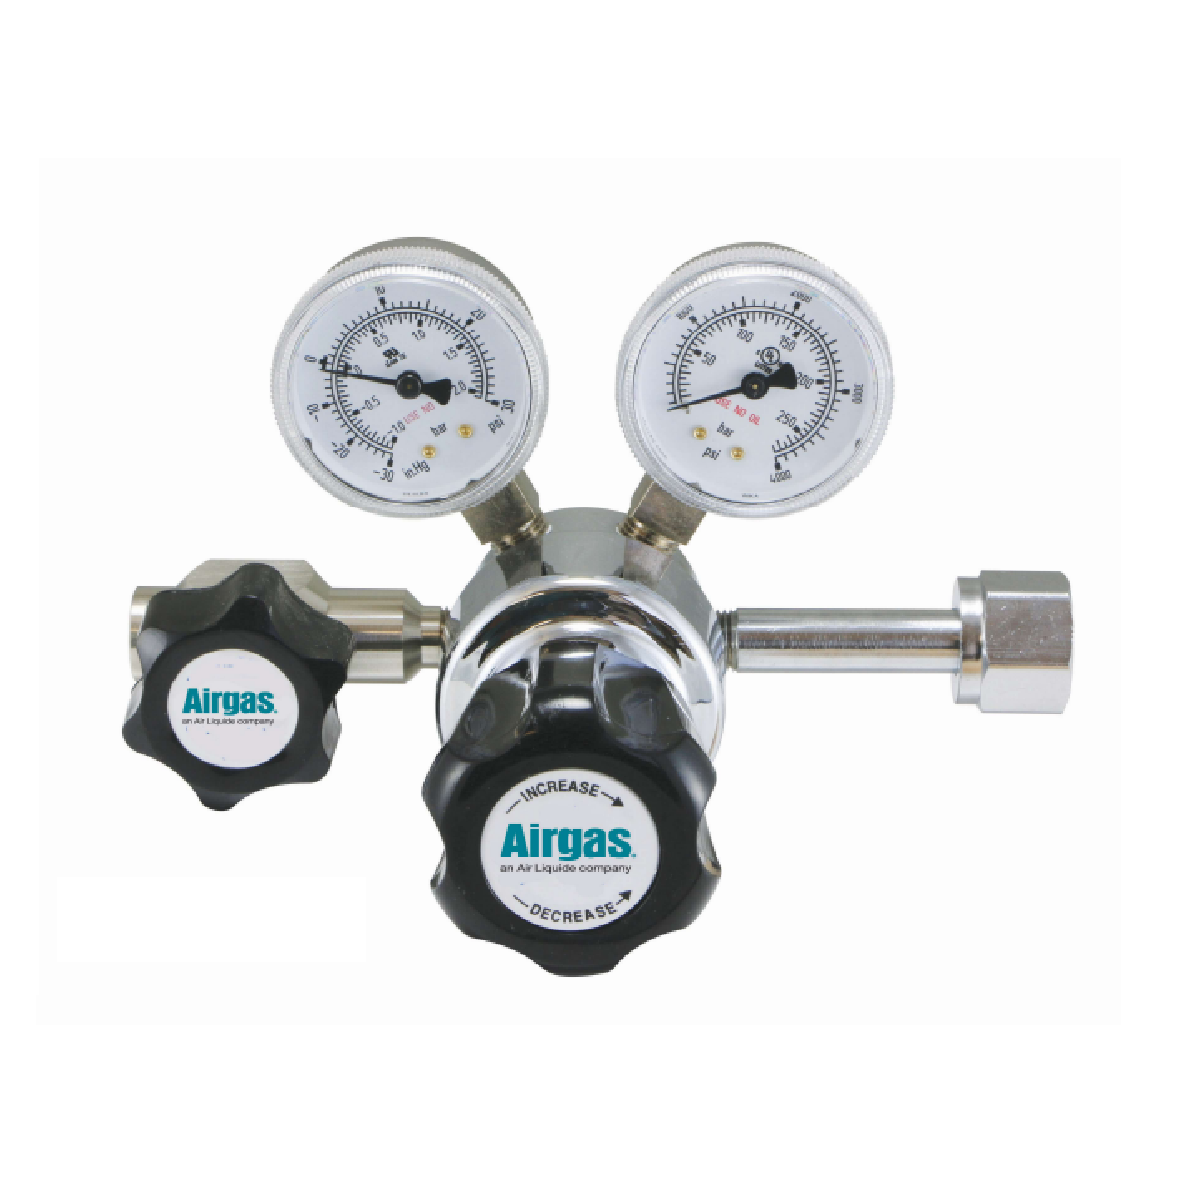 Airgas Model 205B320 Chrome-Plated Brass High Purity Single Stage Regulator With CGA-320 Connection